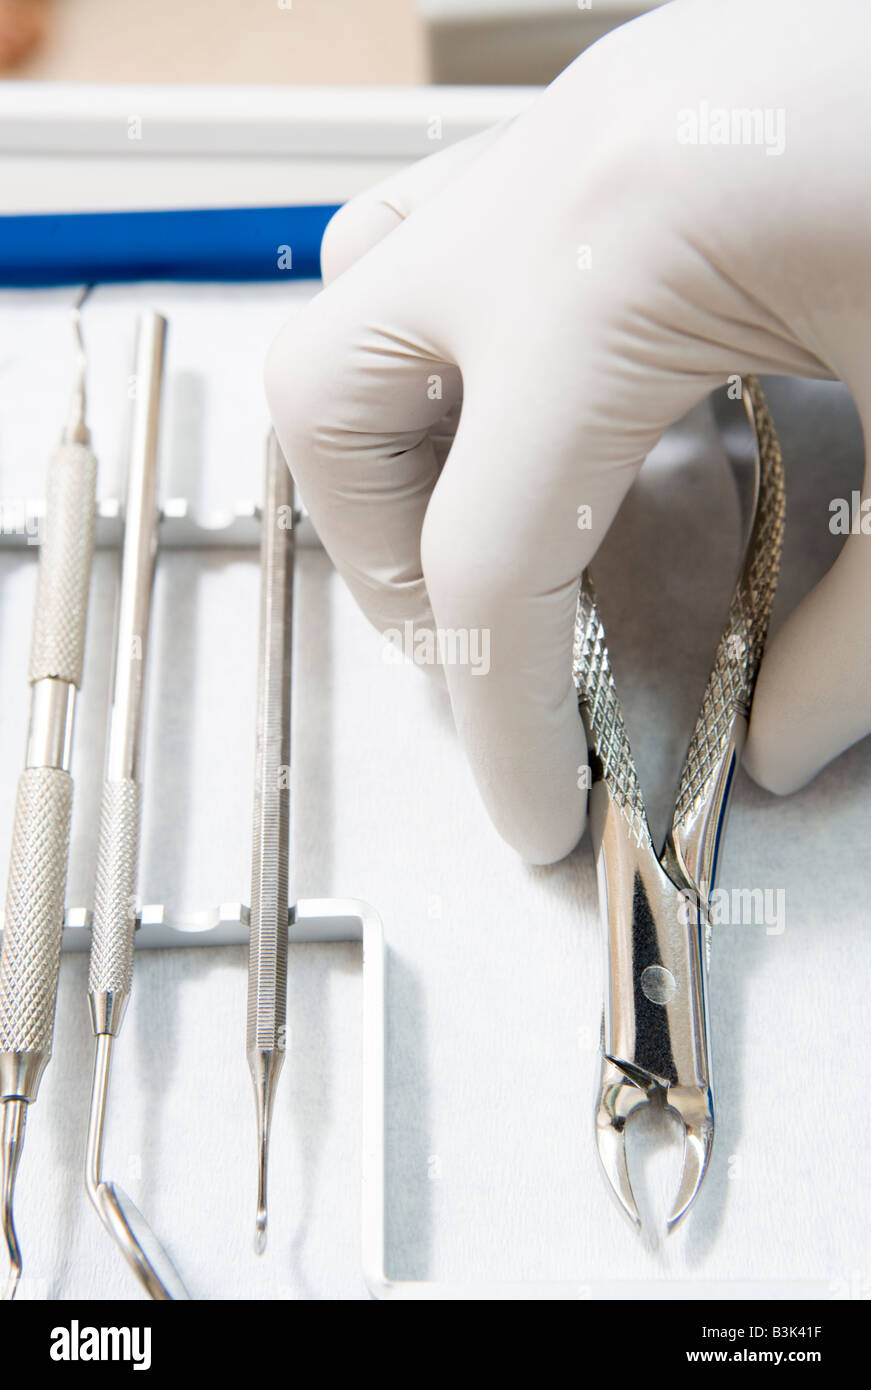 Dental tools with a gloved hand Stock Photo